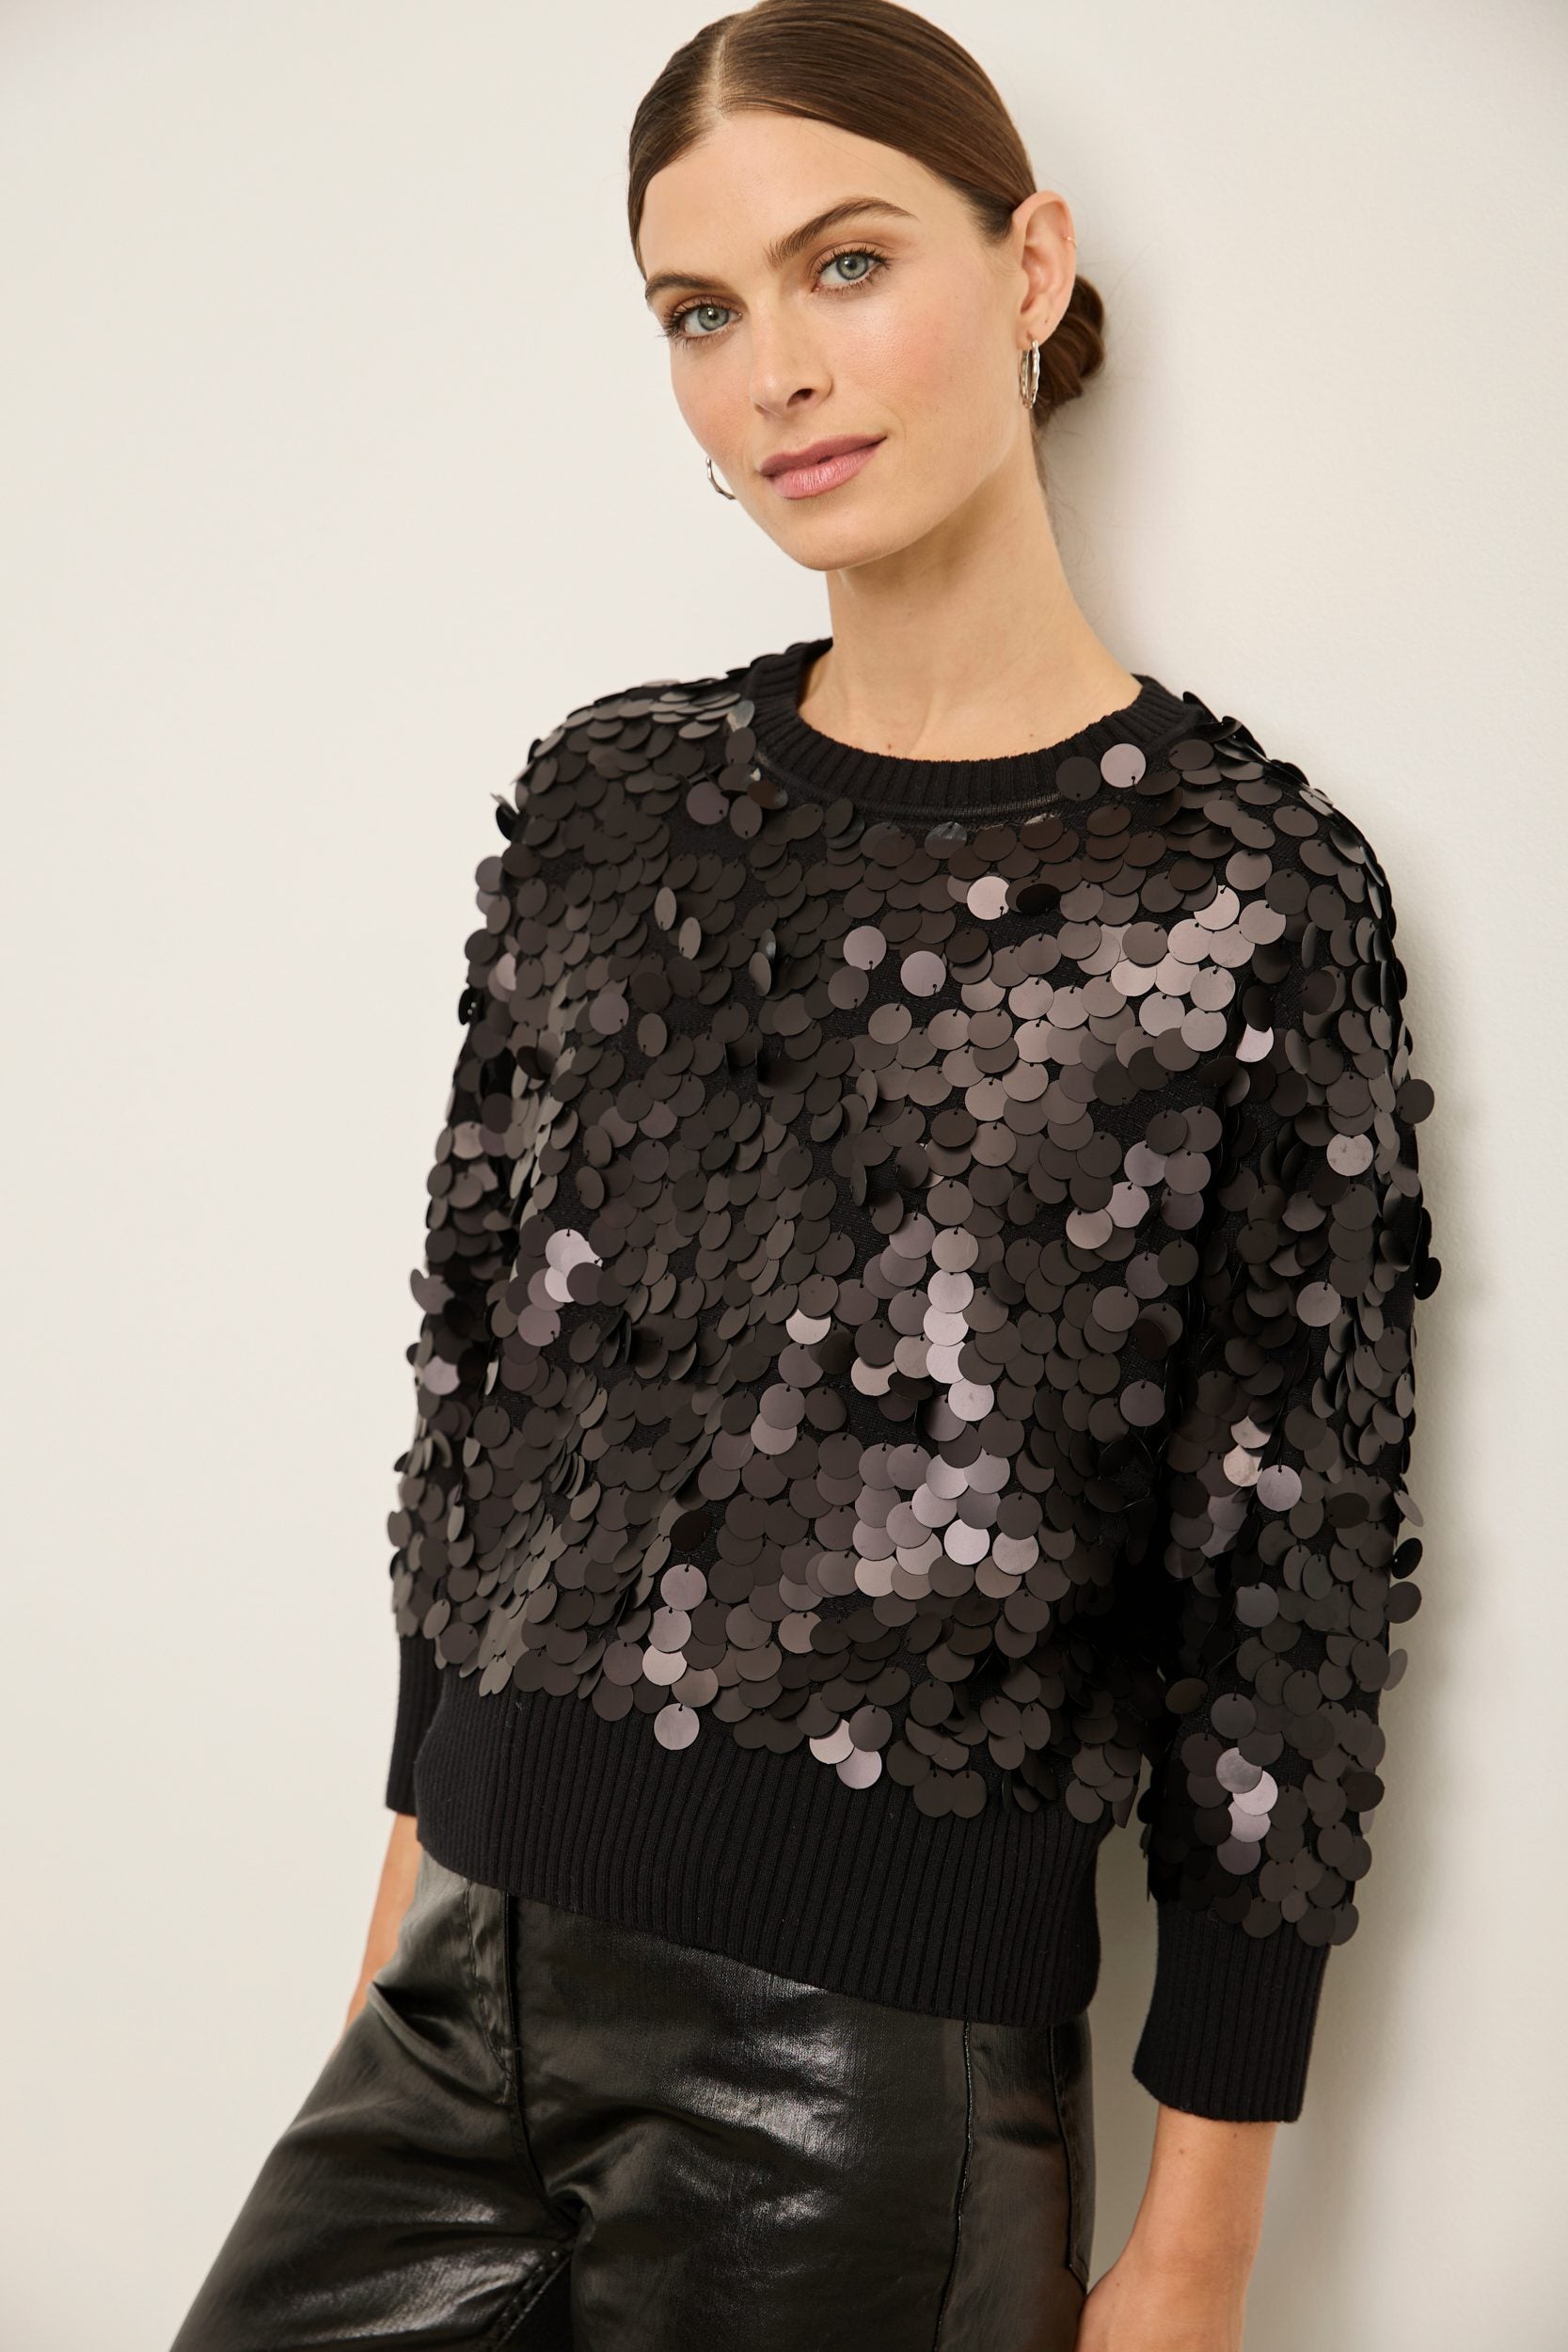 Sequin Knit 3/4 Sleeve Sweater